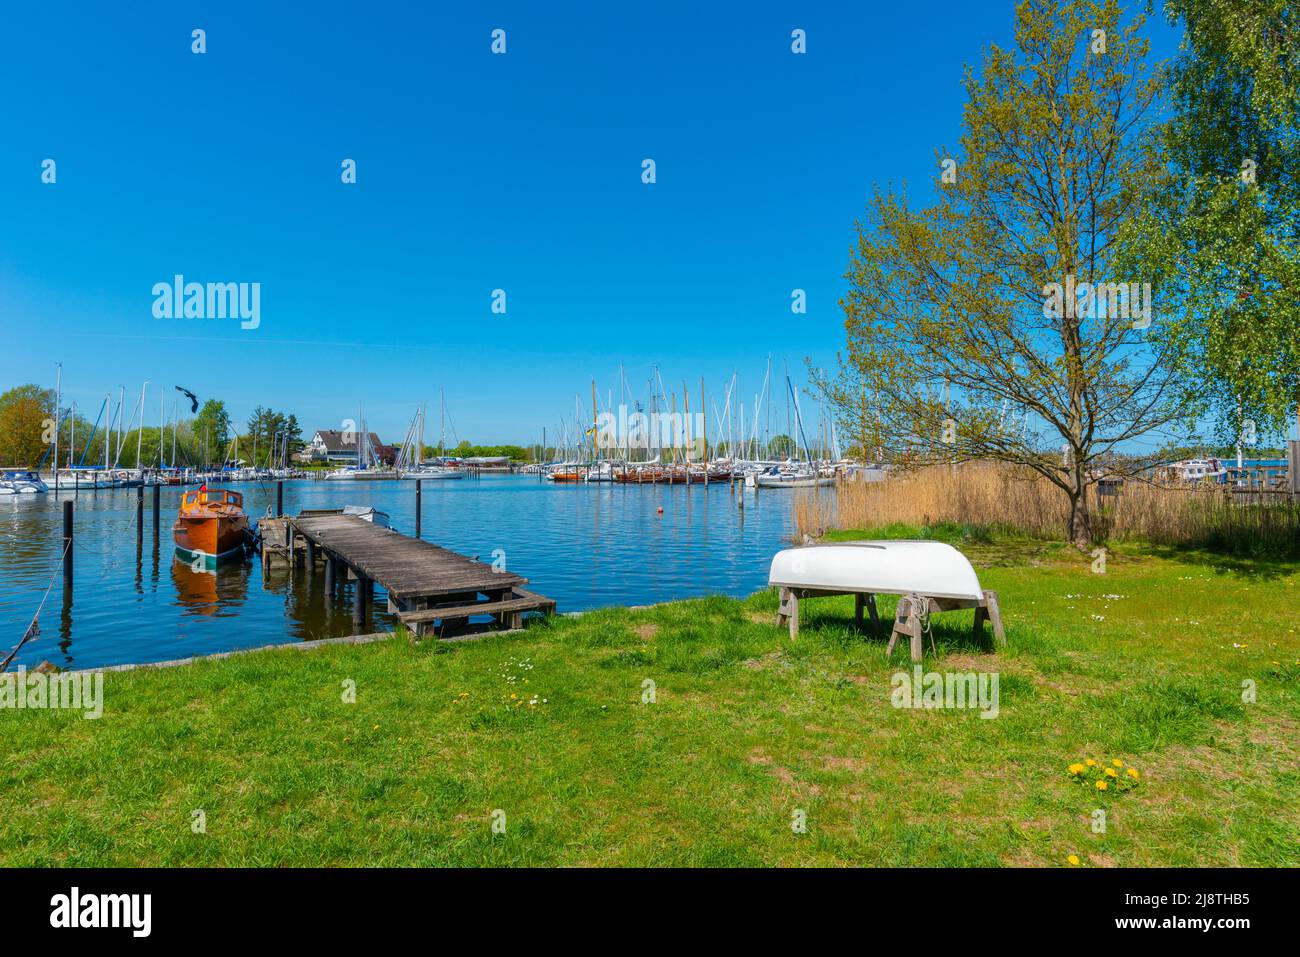 Marina of Arnis on the Schlei Fjord, Germany´s smallest town with about 300 inhabitants, Schleswig-Holstein, Northern Germany, Europe Stock Photo